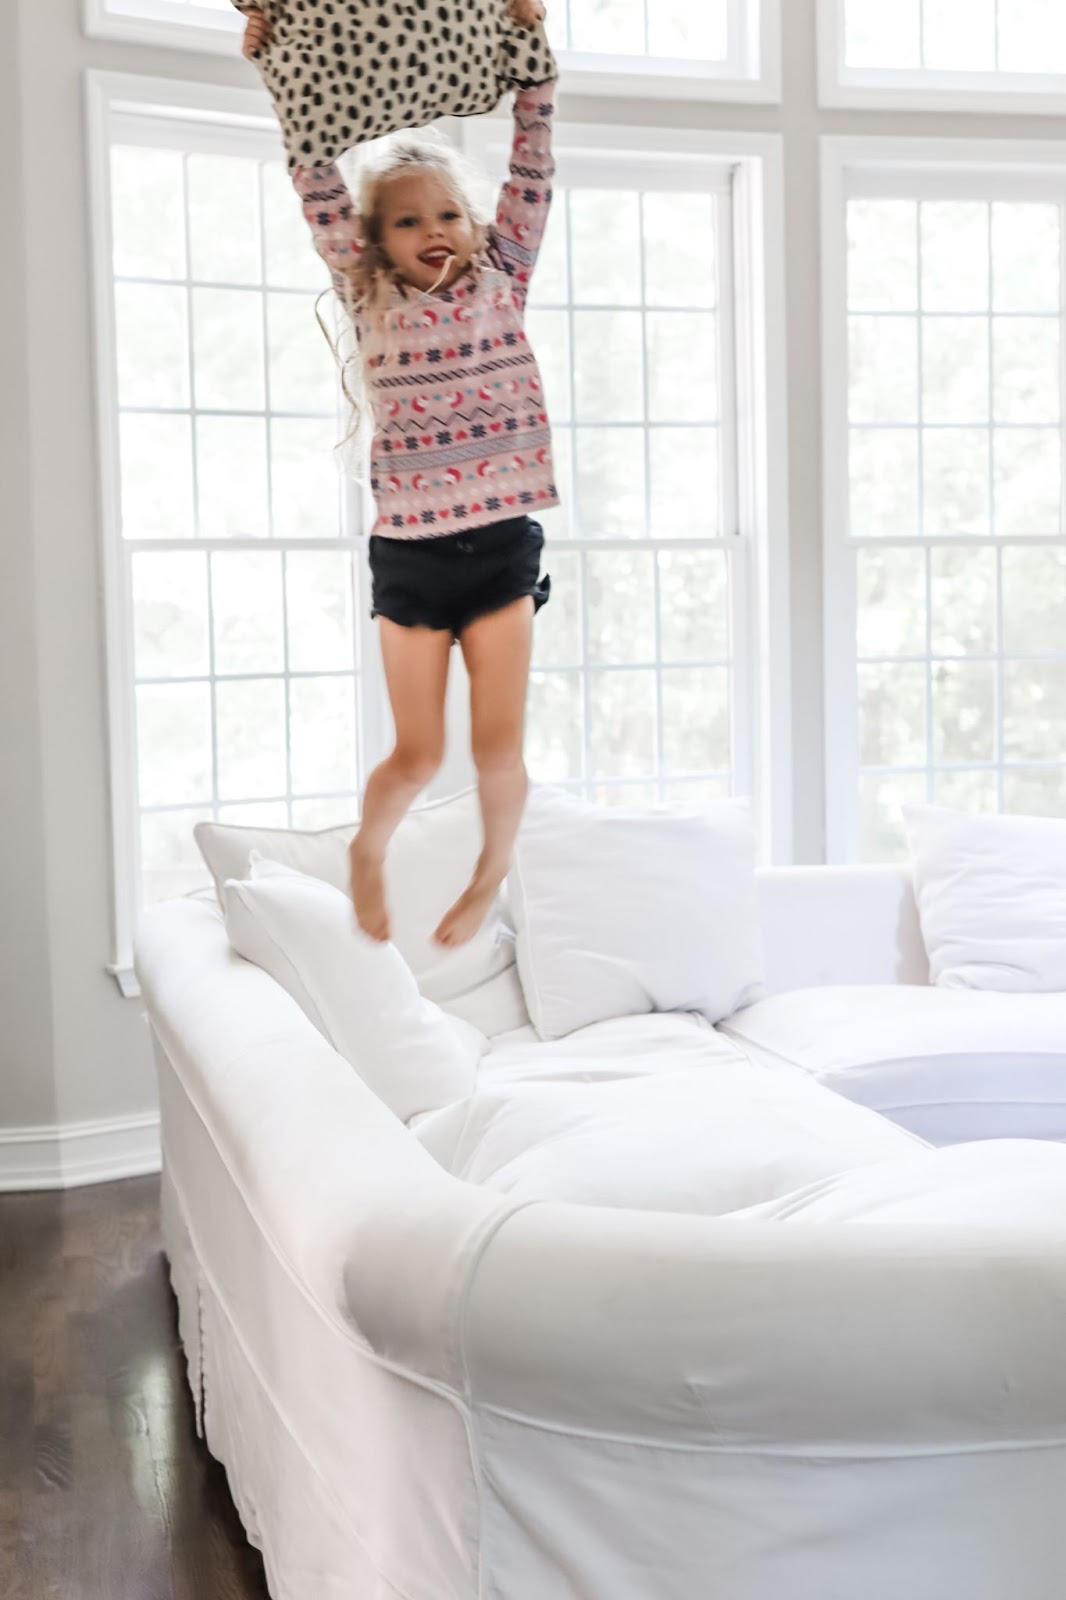 Medicine Cabinet Ideas by popular Atlanta lifestyle blog, City Peach: image of a little girl jumping on a white sectional couch.